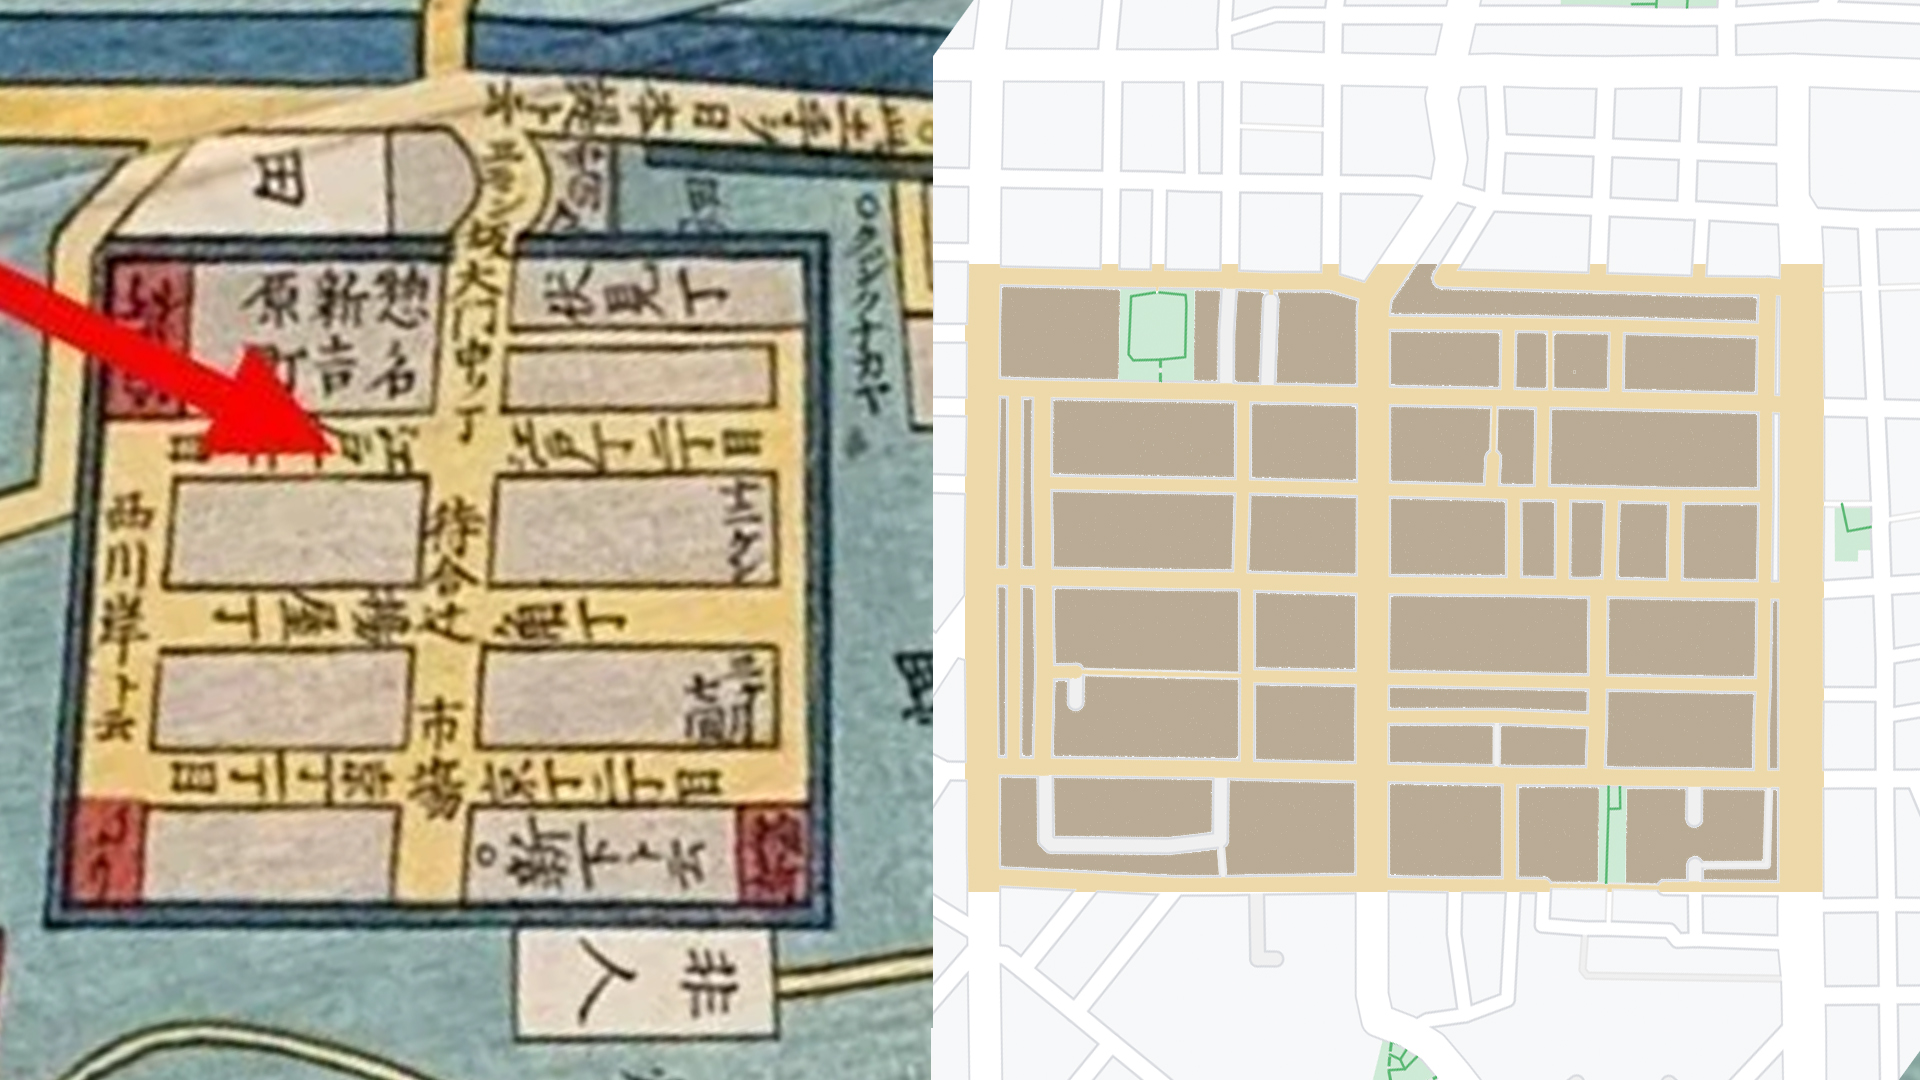 Yoshiwara map (left), Senzoku 4-chome map (right). Note the green areas of the left picture represent rice fields while the blue was the moat that surrounded the area.